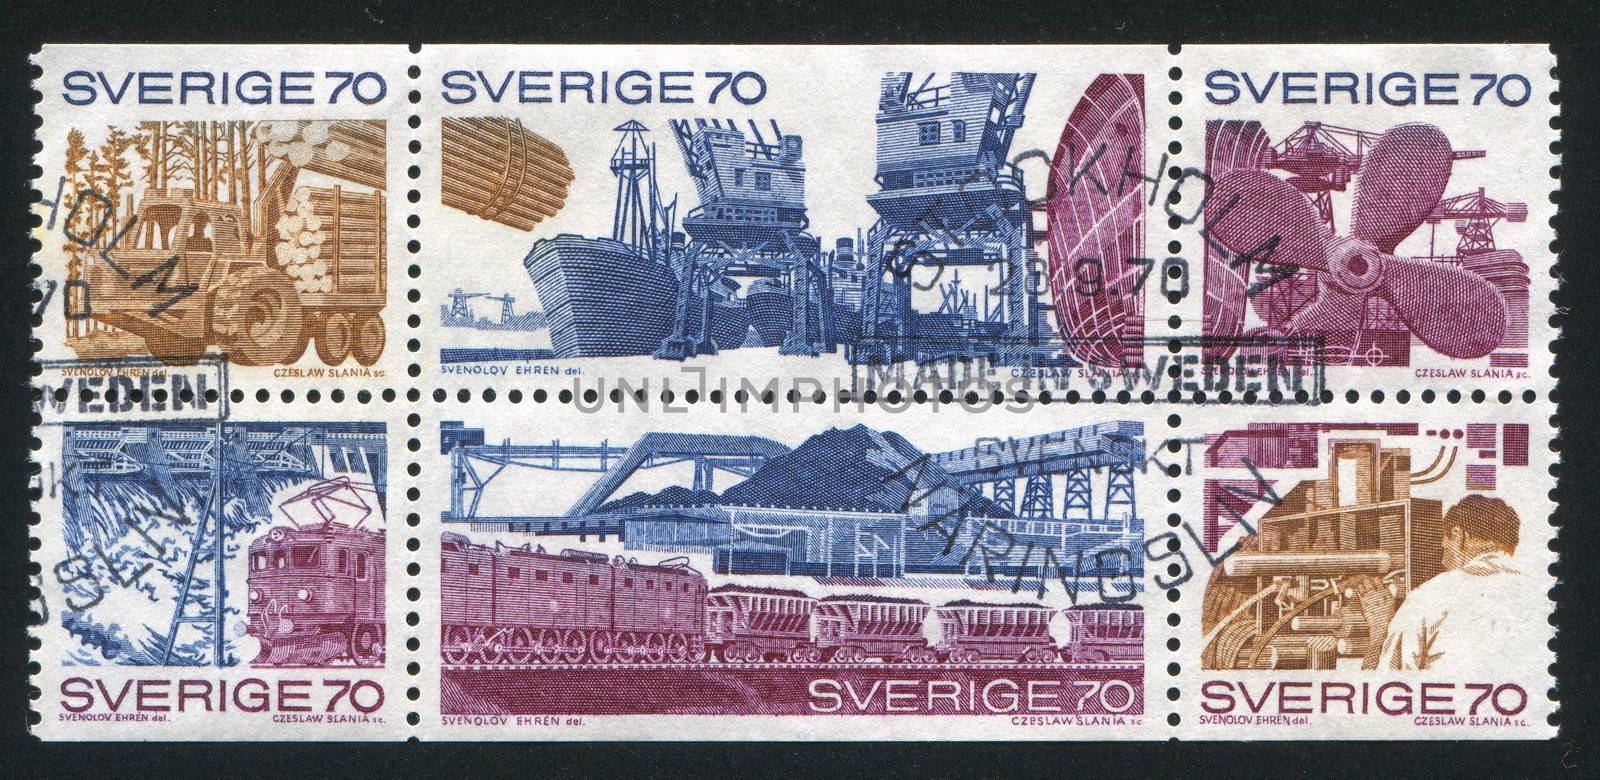 SWEDEN - CIRCA 1970: stamp printed by Sweden, shows Industry, circa 1970